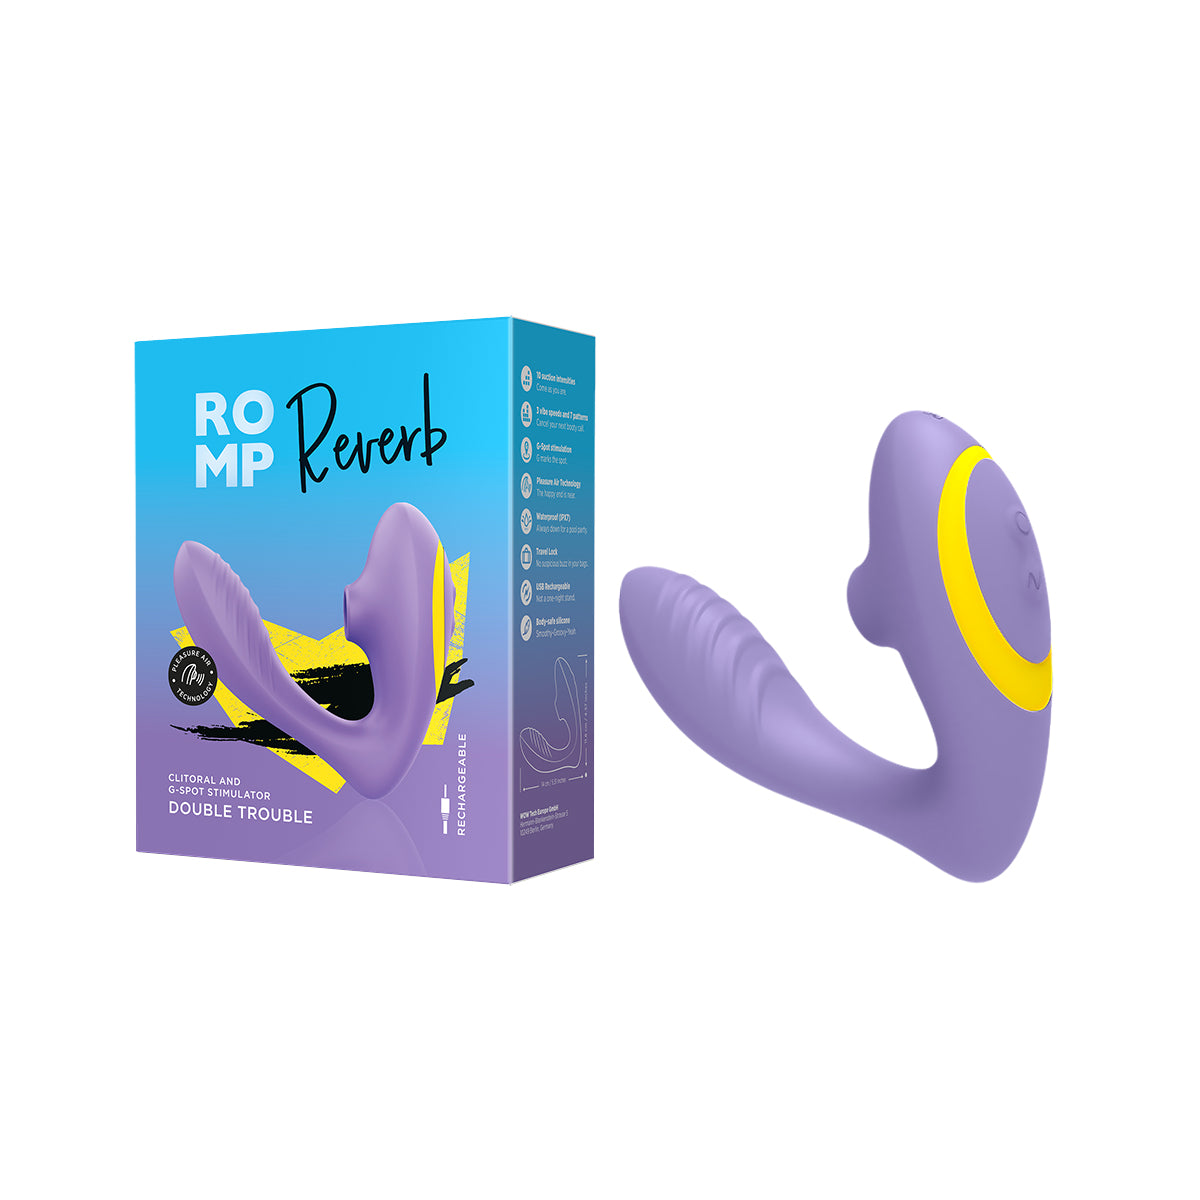 ROMP Reverb Clitoral Air Pressure Toy and G-spot Vibe